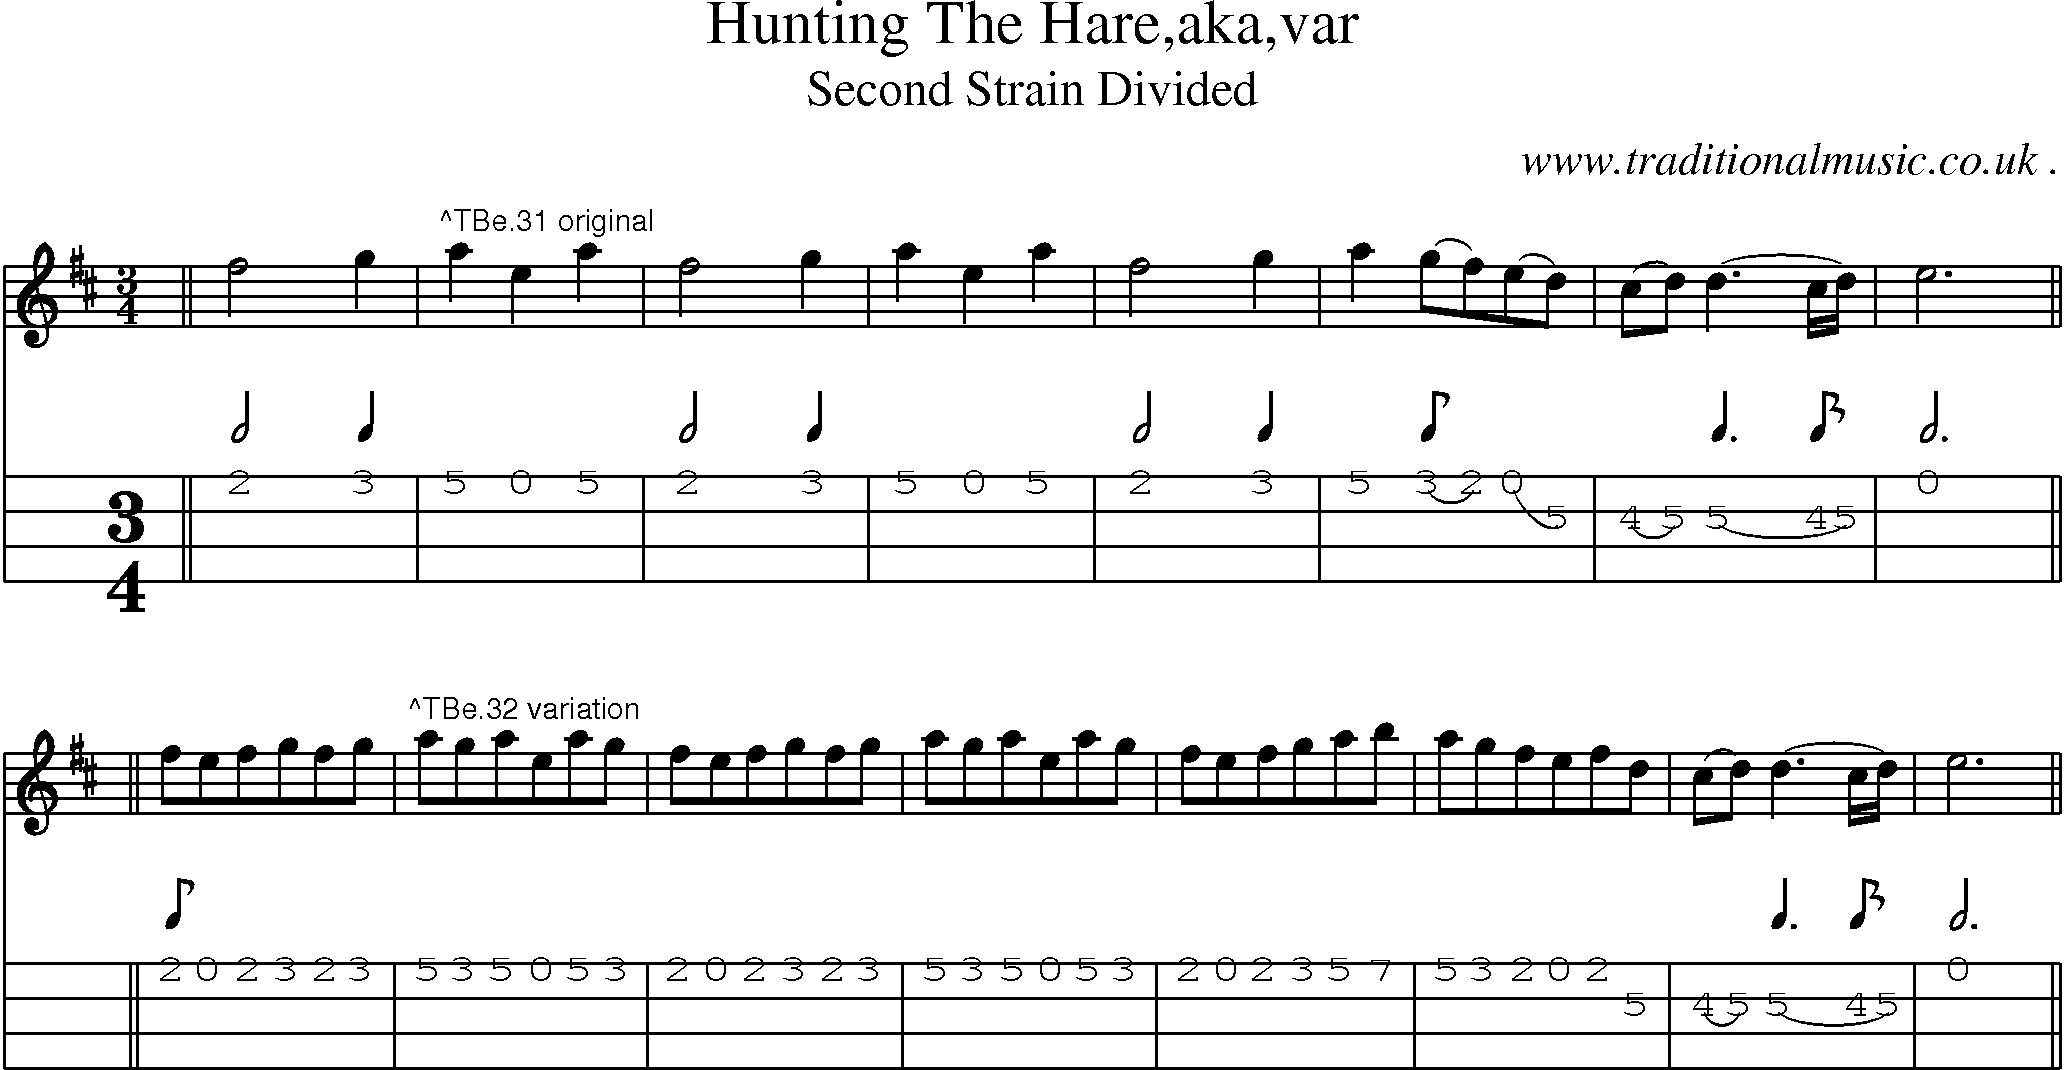 Sheet-Music and Mandolin Tabs for Hunting The Hareakavar